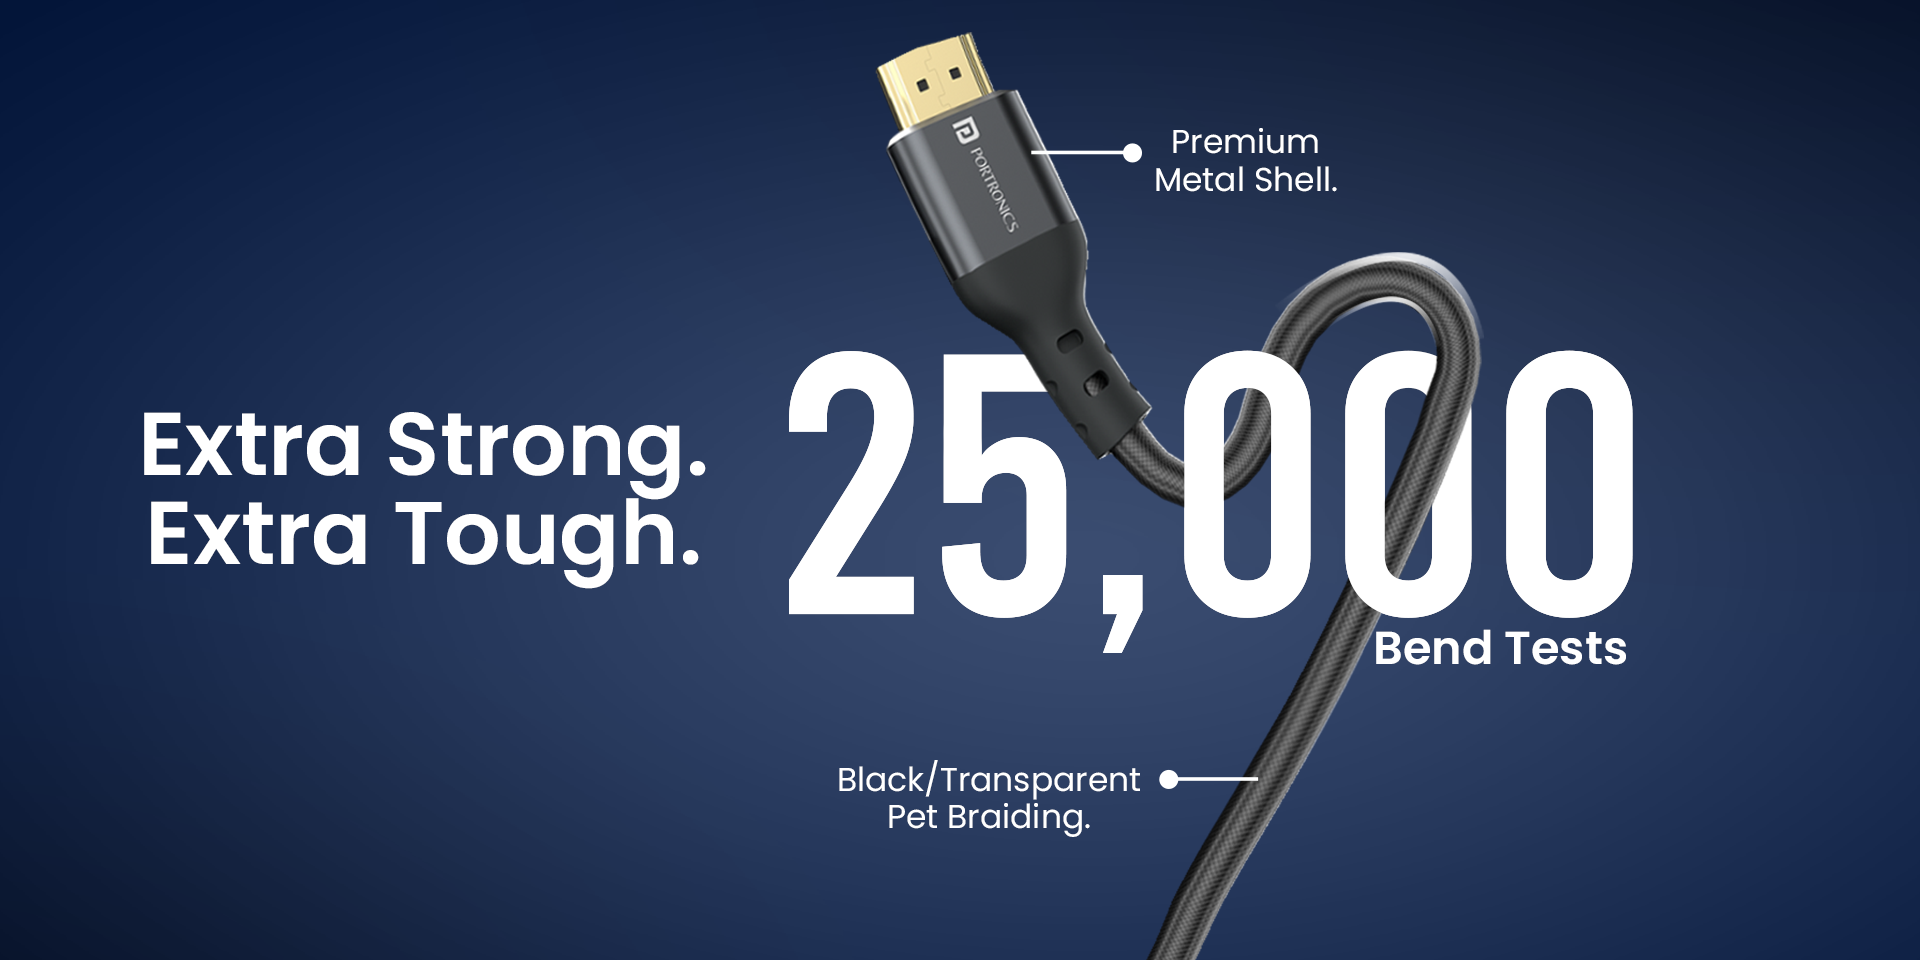 Portronics Konnect Stream 3M 4k hdmi to Hdmi cable with 25000 bend test for extra tough